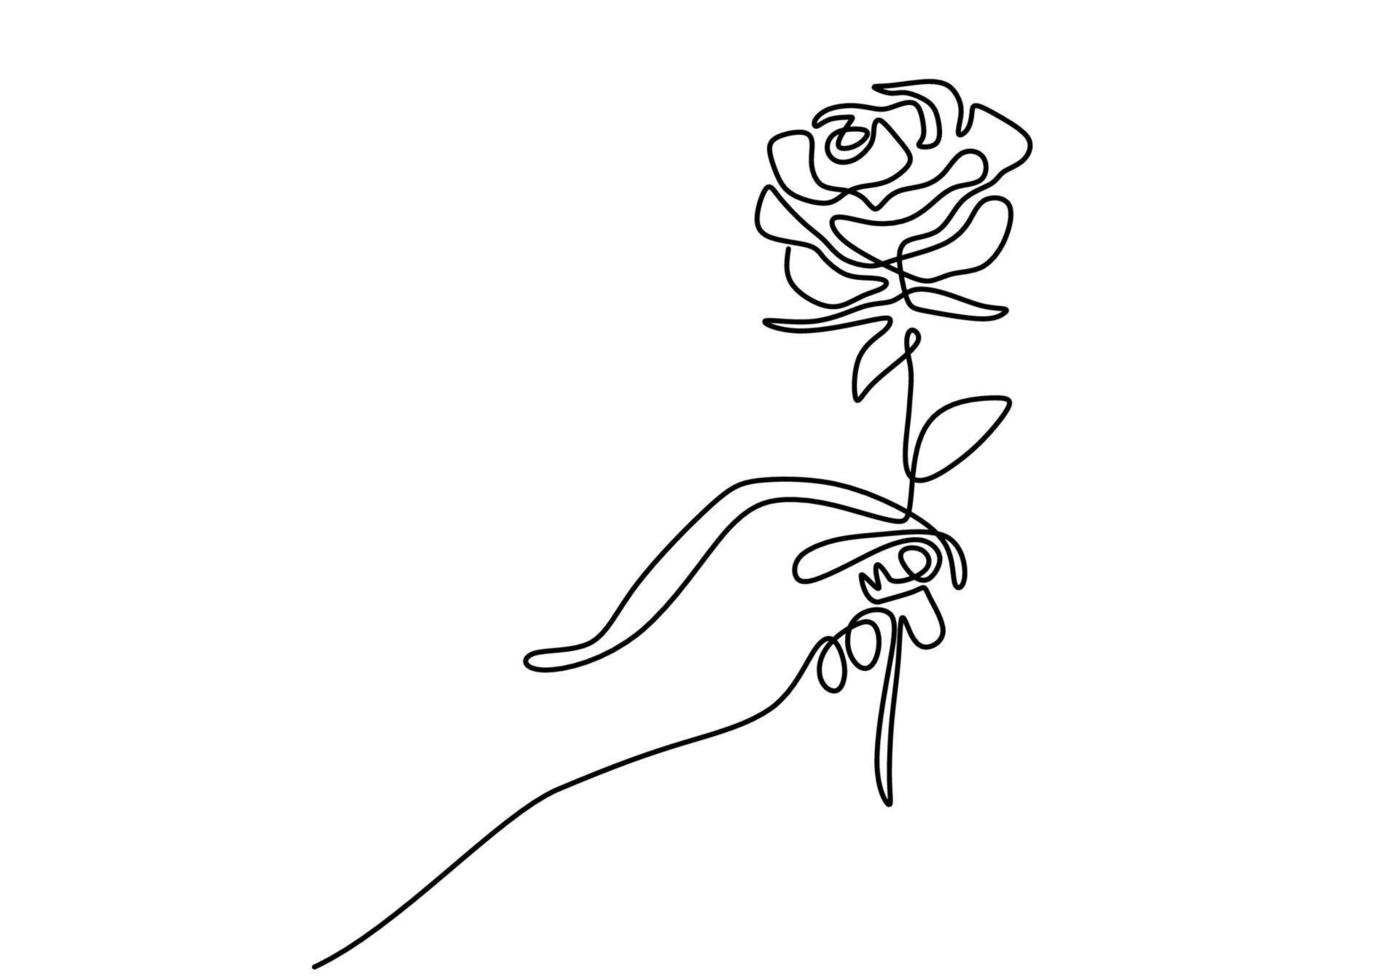 Continuous line drawing hand holding rose flower minimalist vector